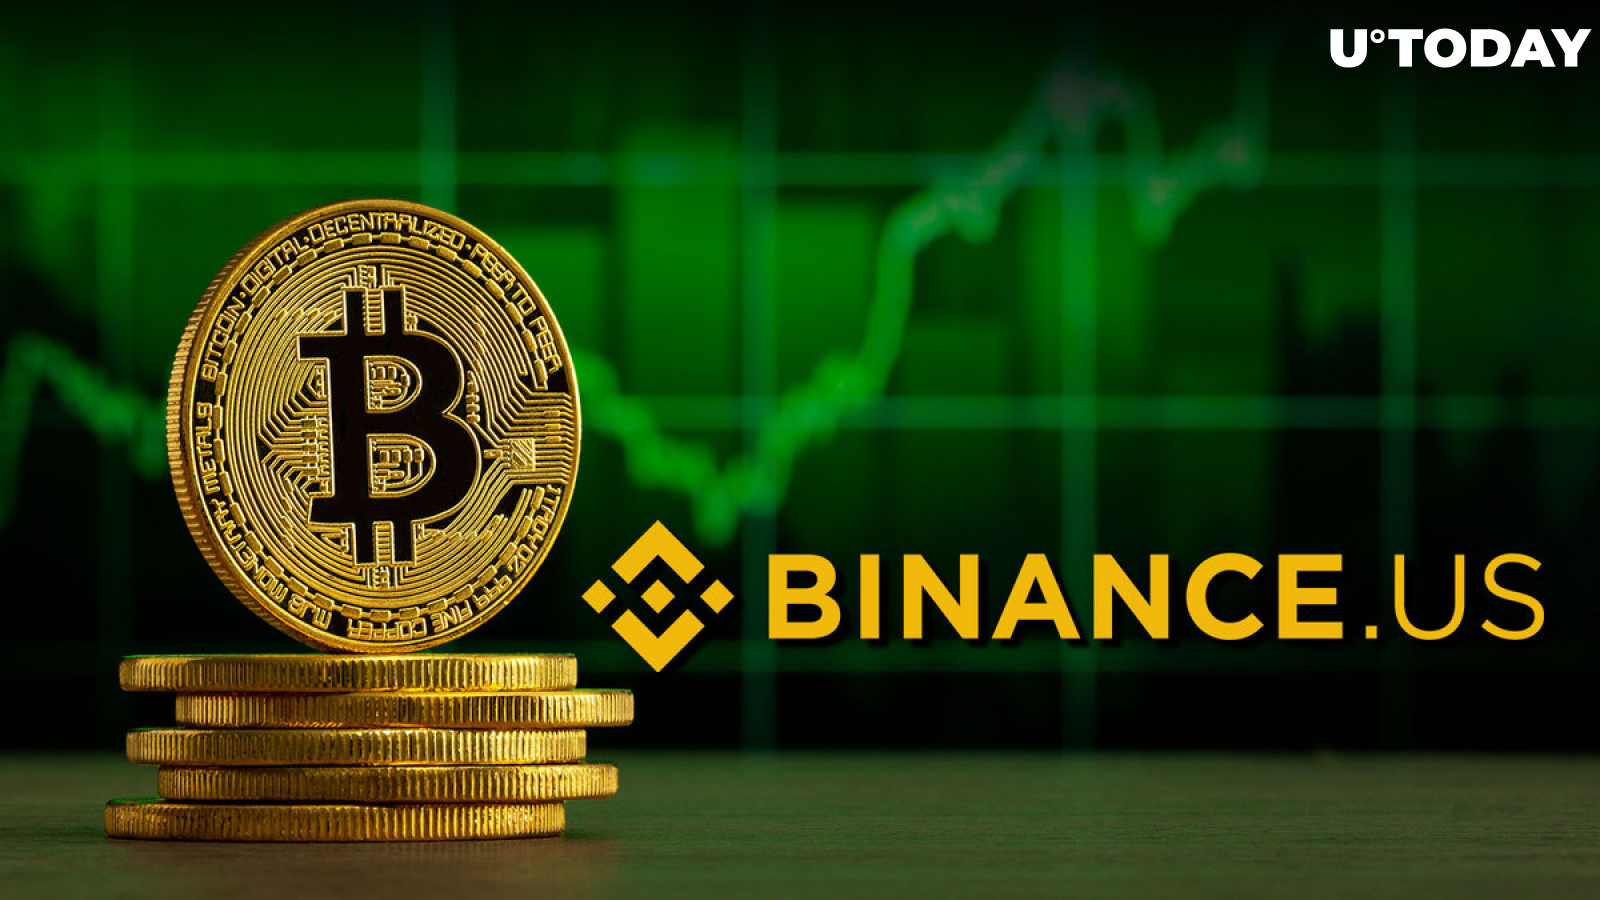 Bitcoin (BTC) Unexpectedly Spikes to $138,000 on Binance.US. Here’s What Happened